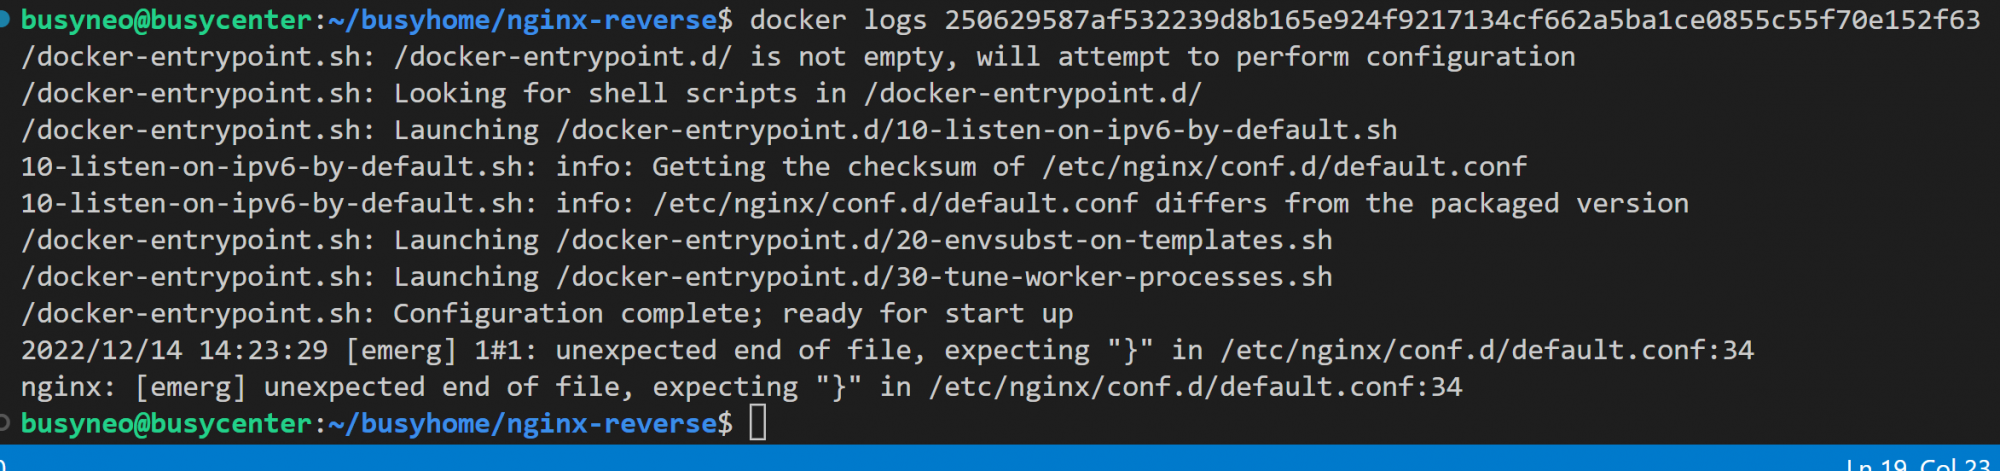 How to run Docker in debug mode and view container logs? View Docker container logs.